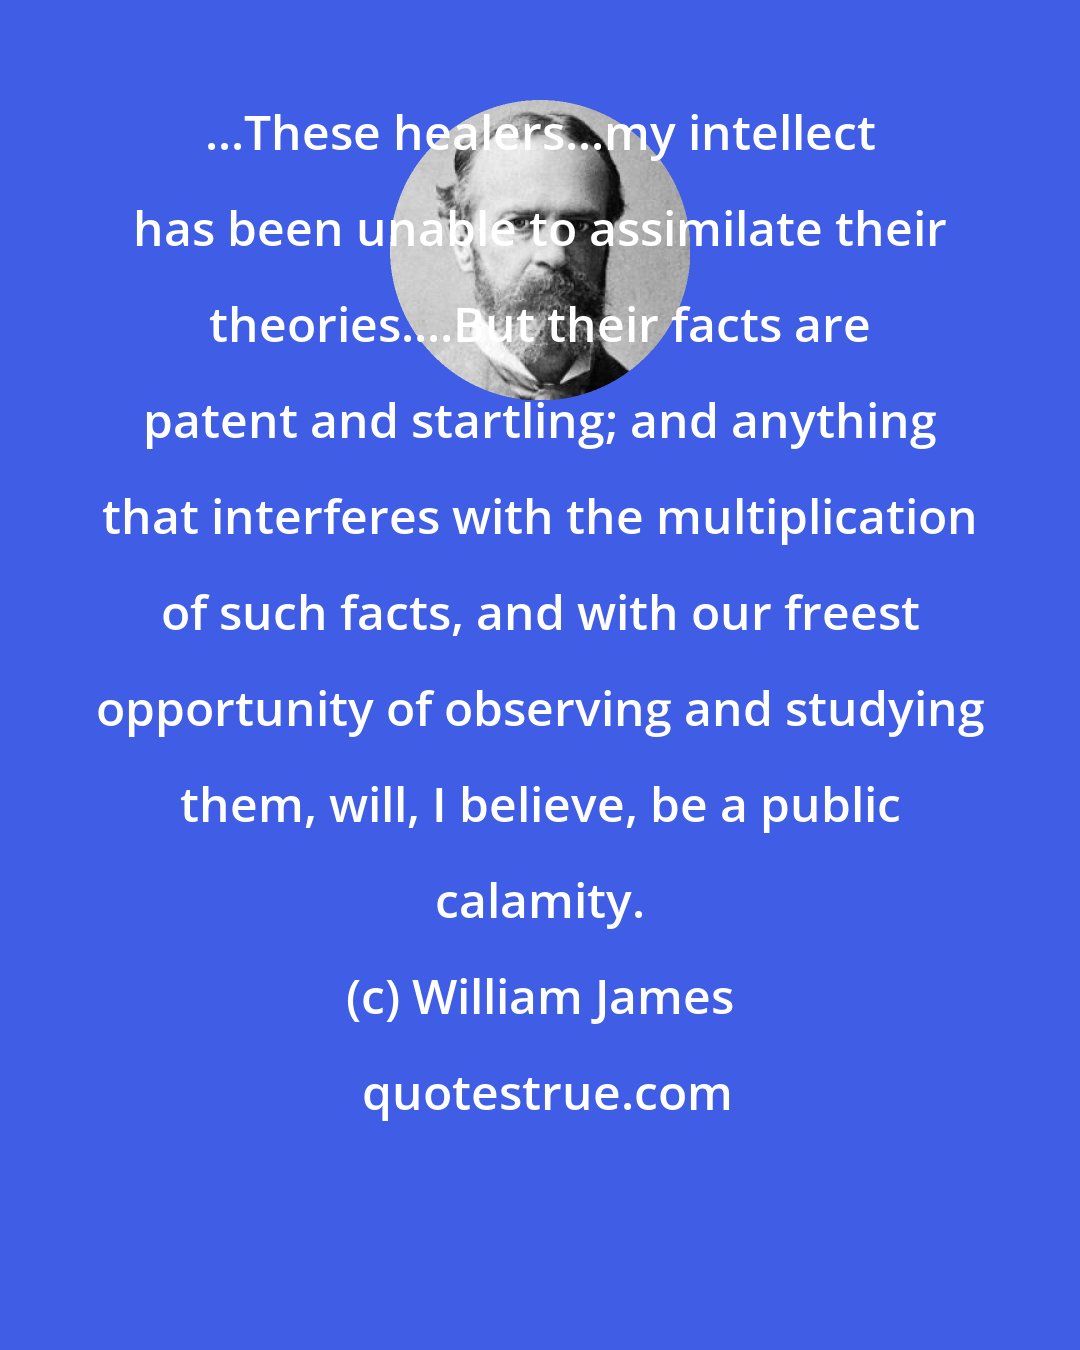 William James: ...These healers...my intellect has been unable to assimilate their theories....But their facts are patent and startling; and anything that interferes with the multiplication of such facts, and with our freest opportunity of observing and studying them, will, I believe, be a public calamity.